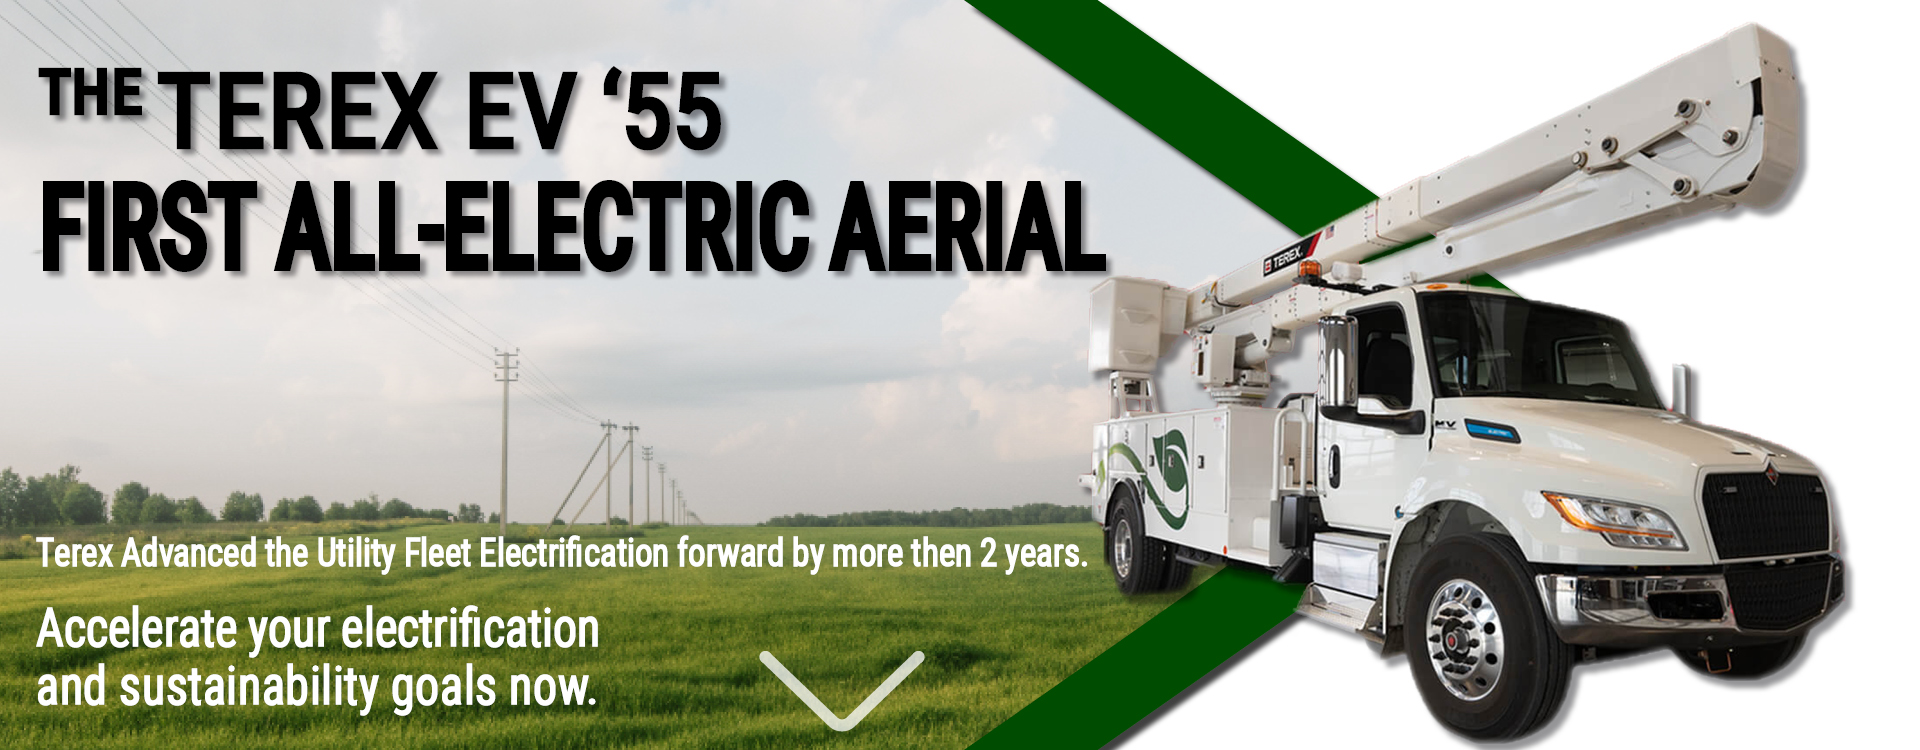 First Electric Bucket Truck | The Terex EV